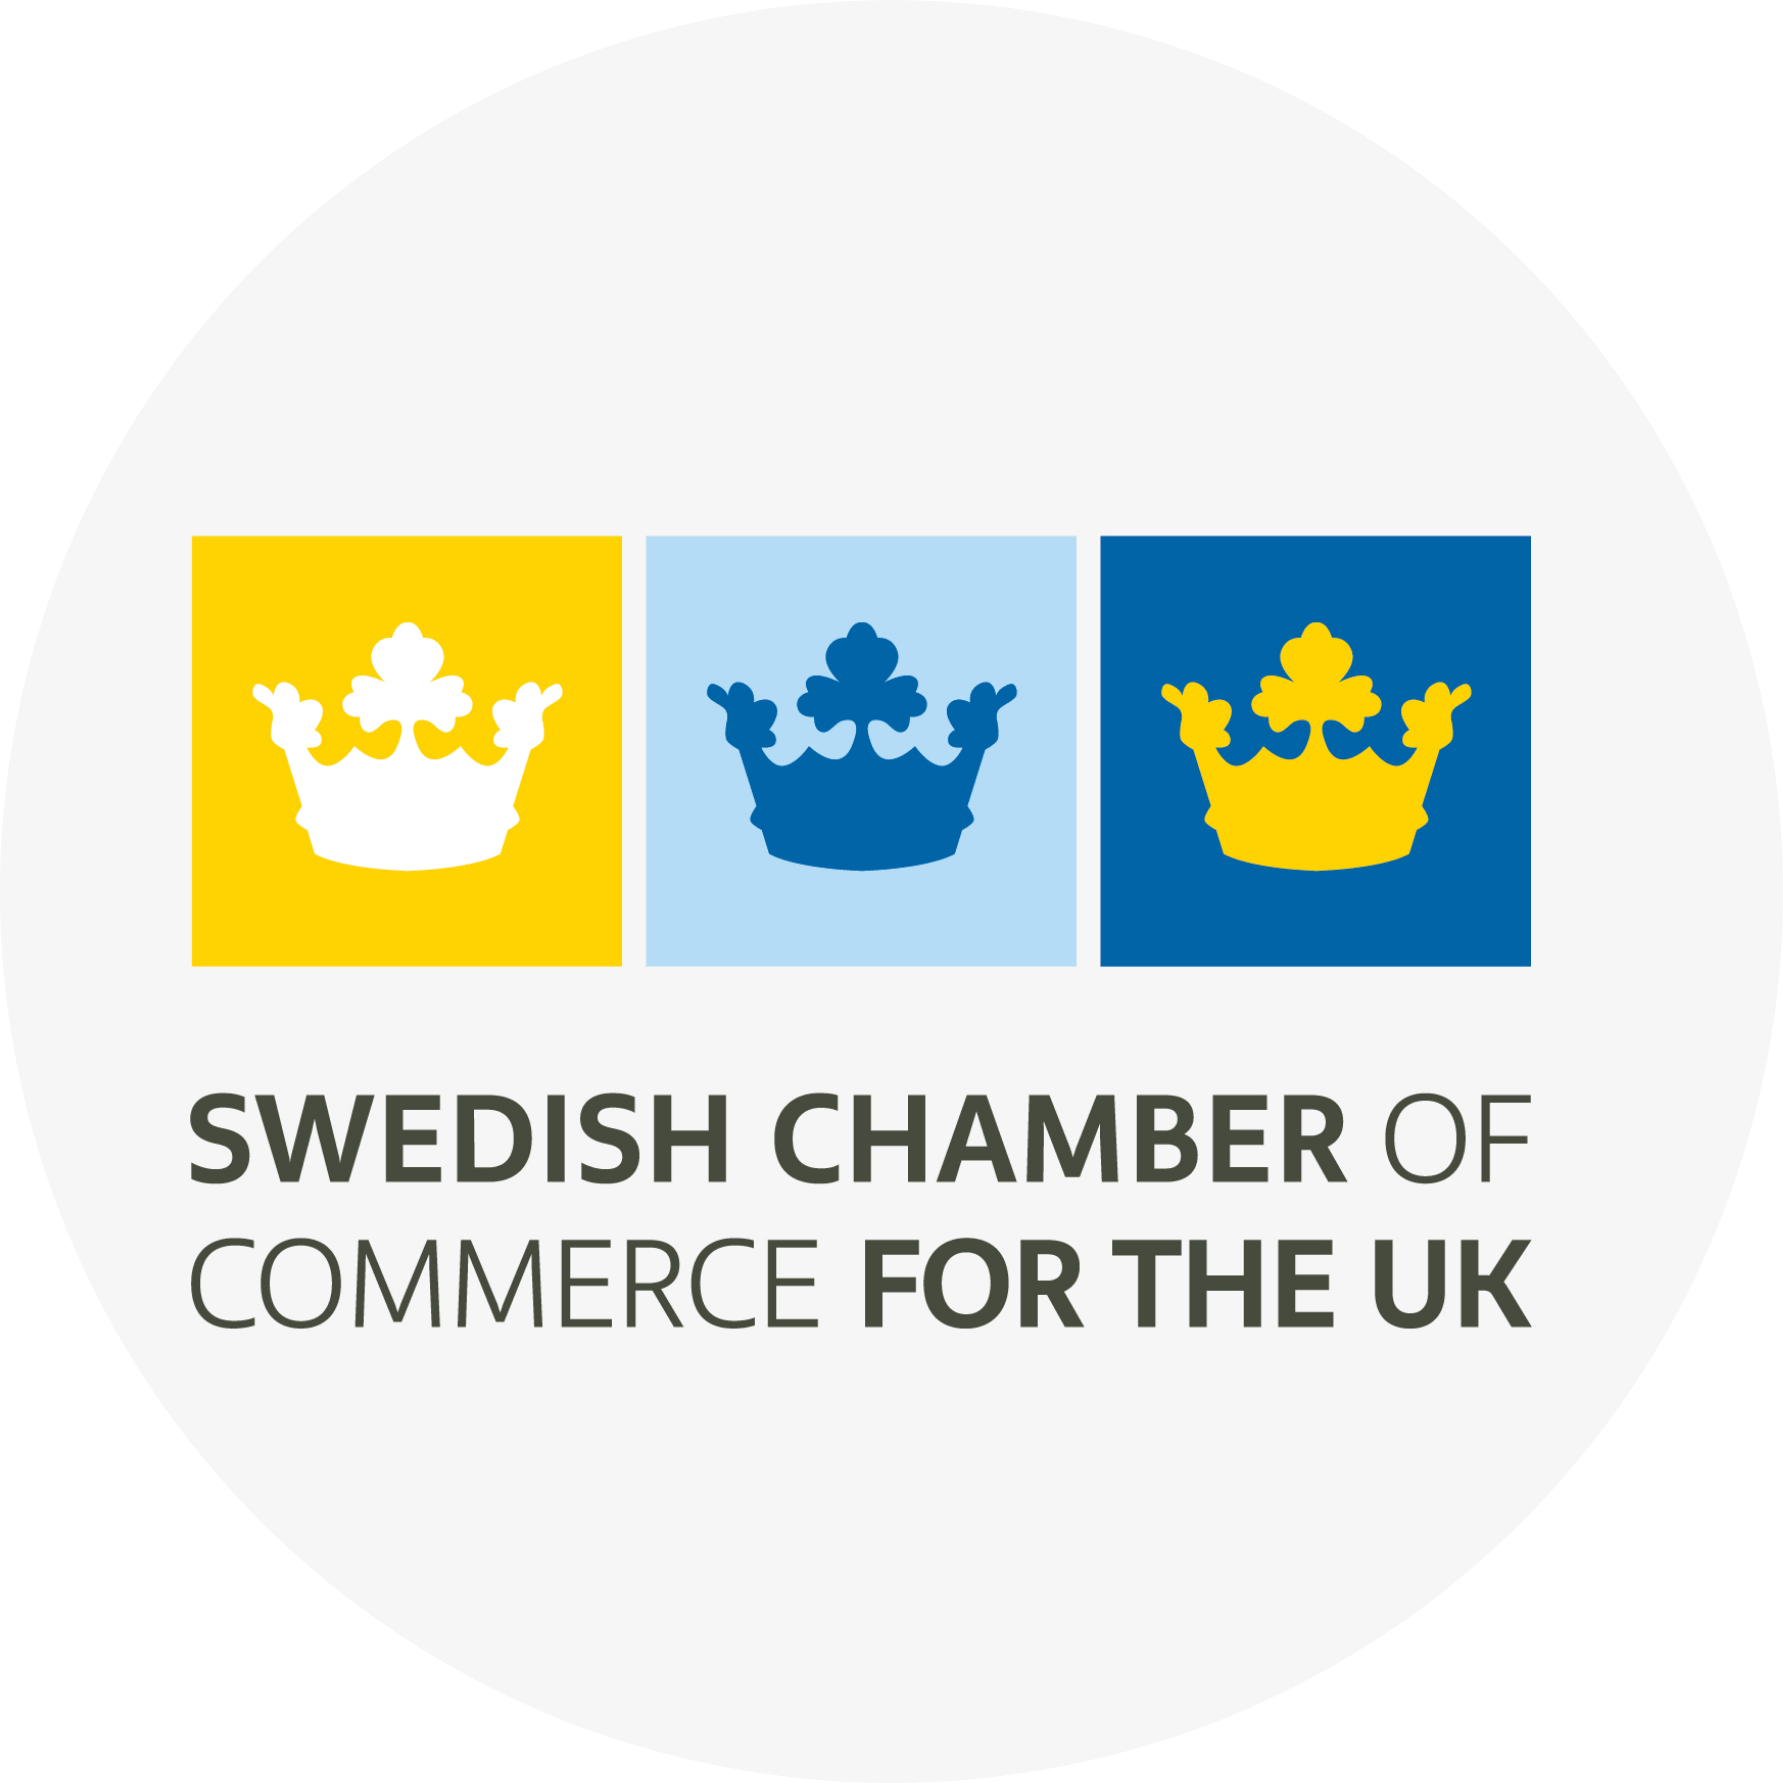 Swedish chamber of commerce for the UK